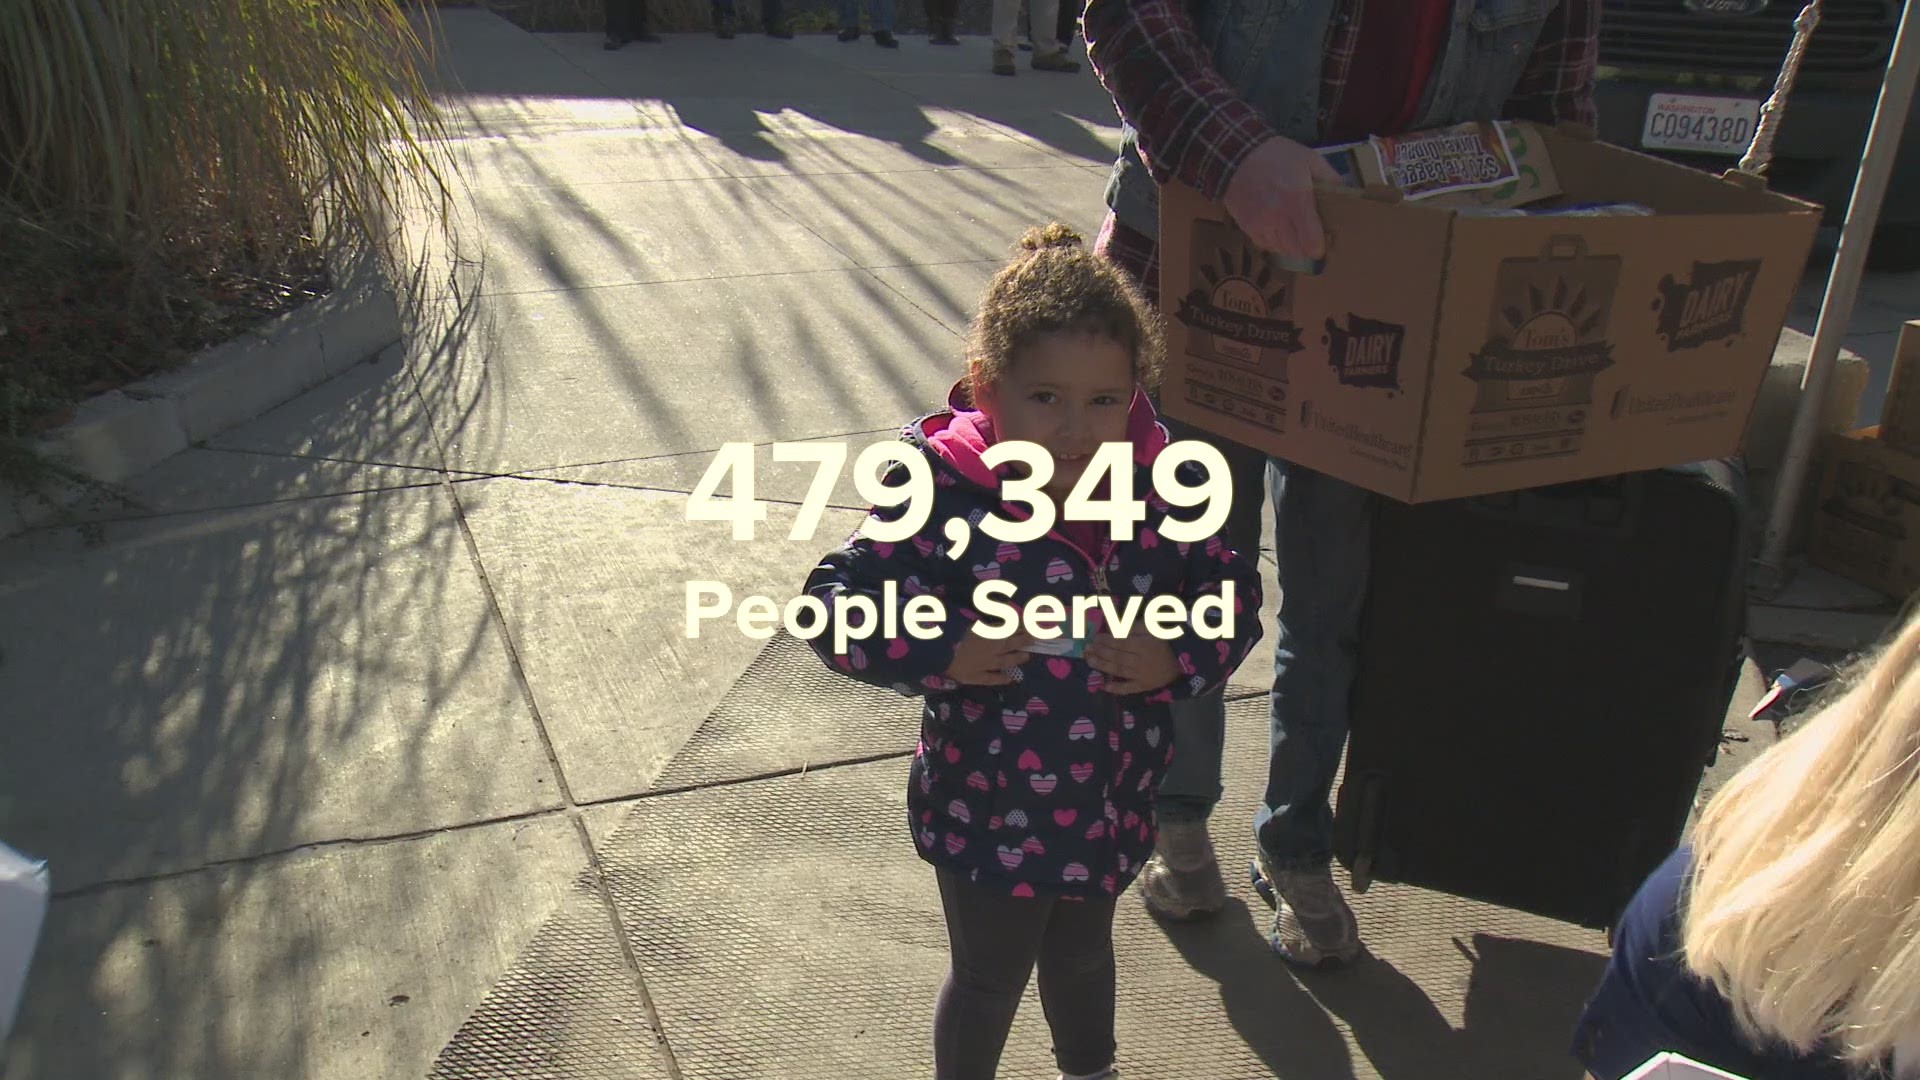 KREM takes a look back at 20 years of helping families through Tom's Turkey Drive.